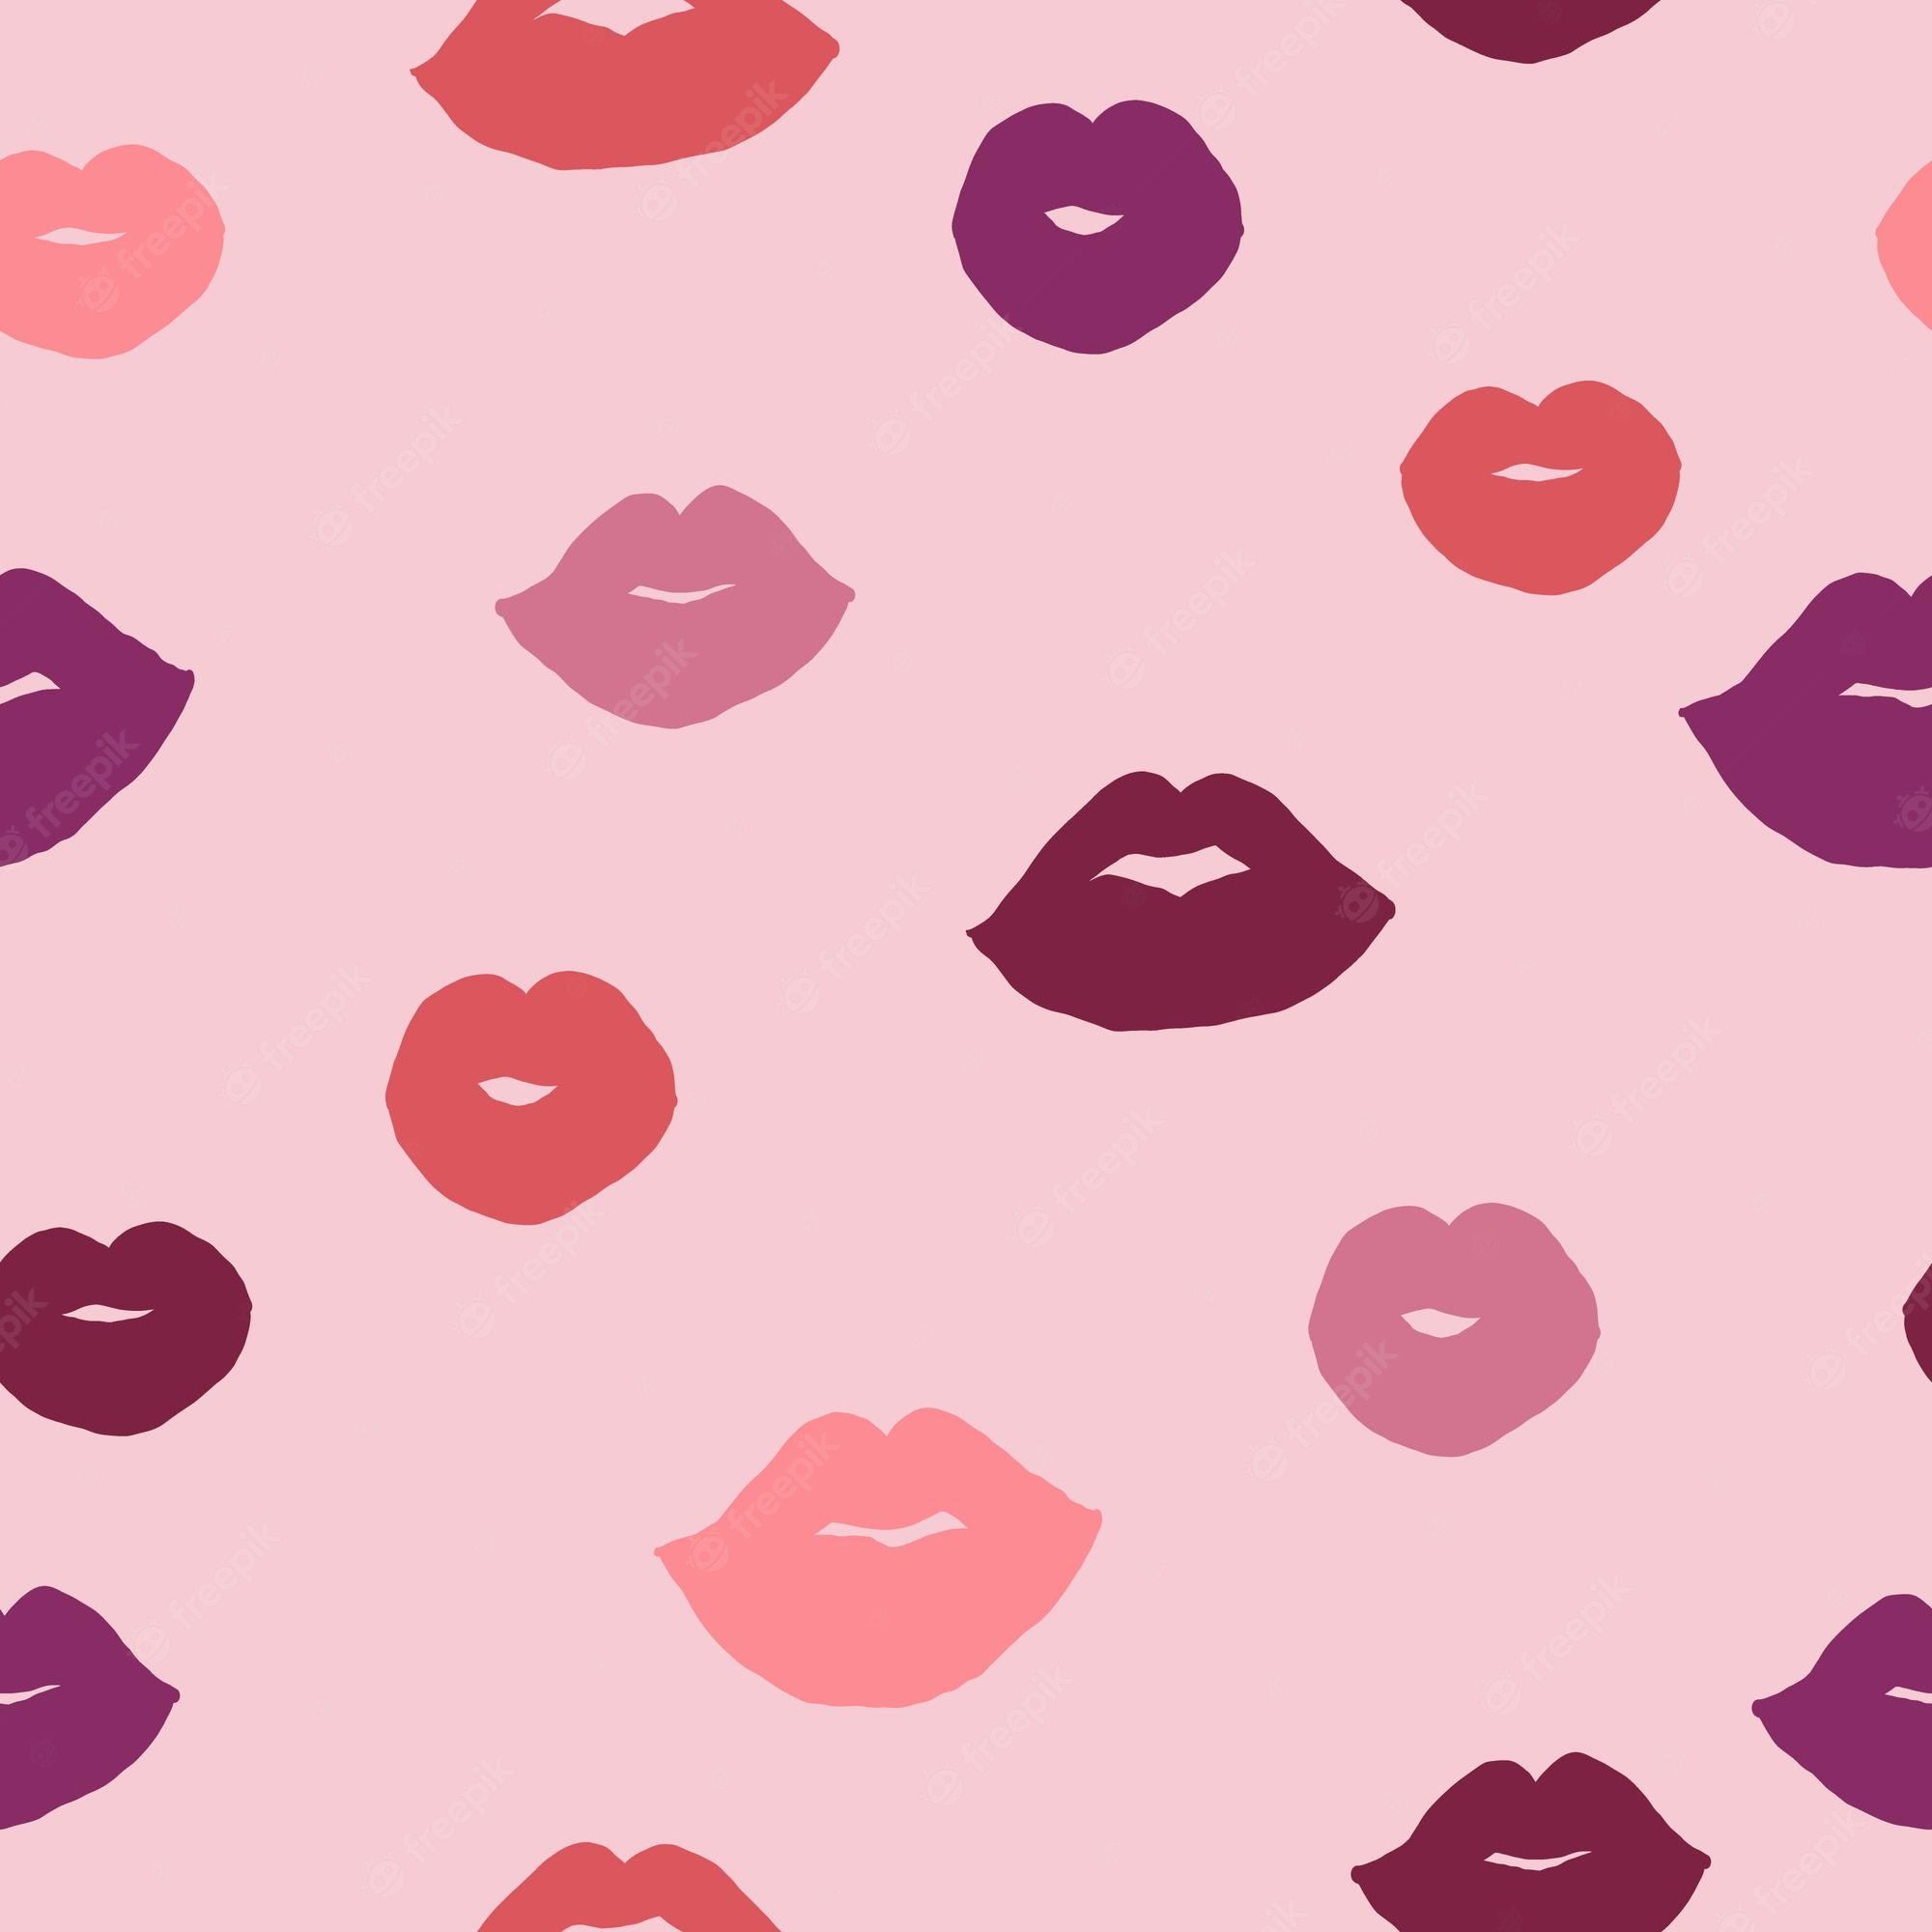 A pattern of different colored lips on a pink background - Makeup, lips